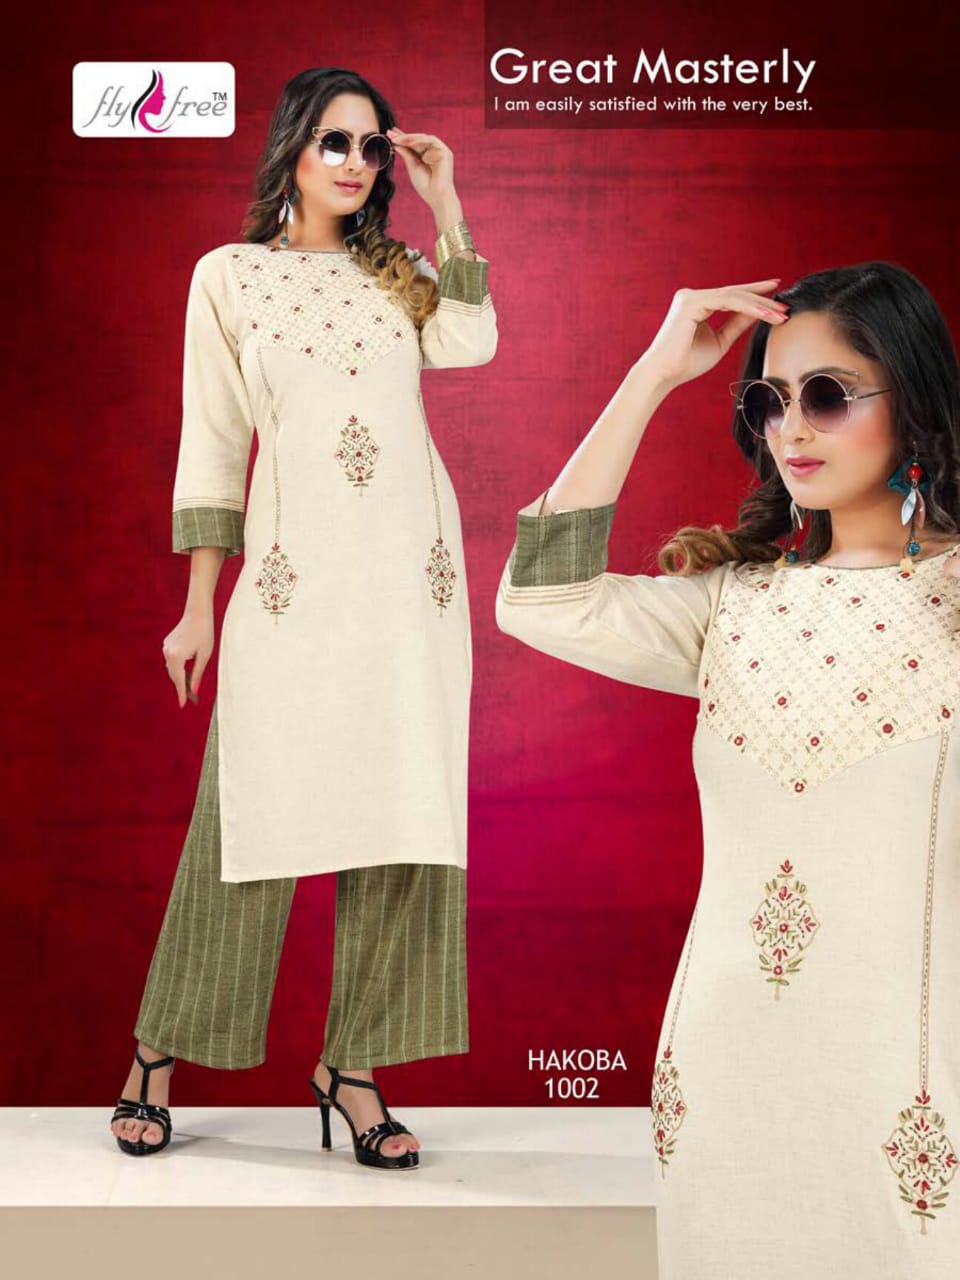 Hakoba embroidered and cutworked printed cotton Kurtis